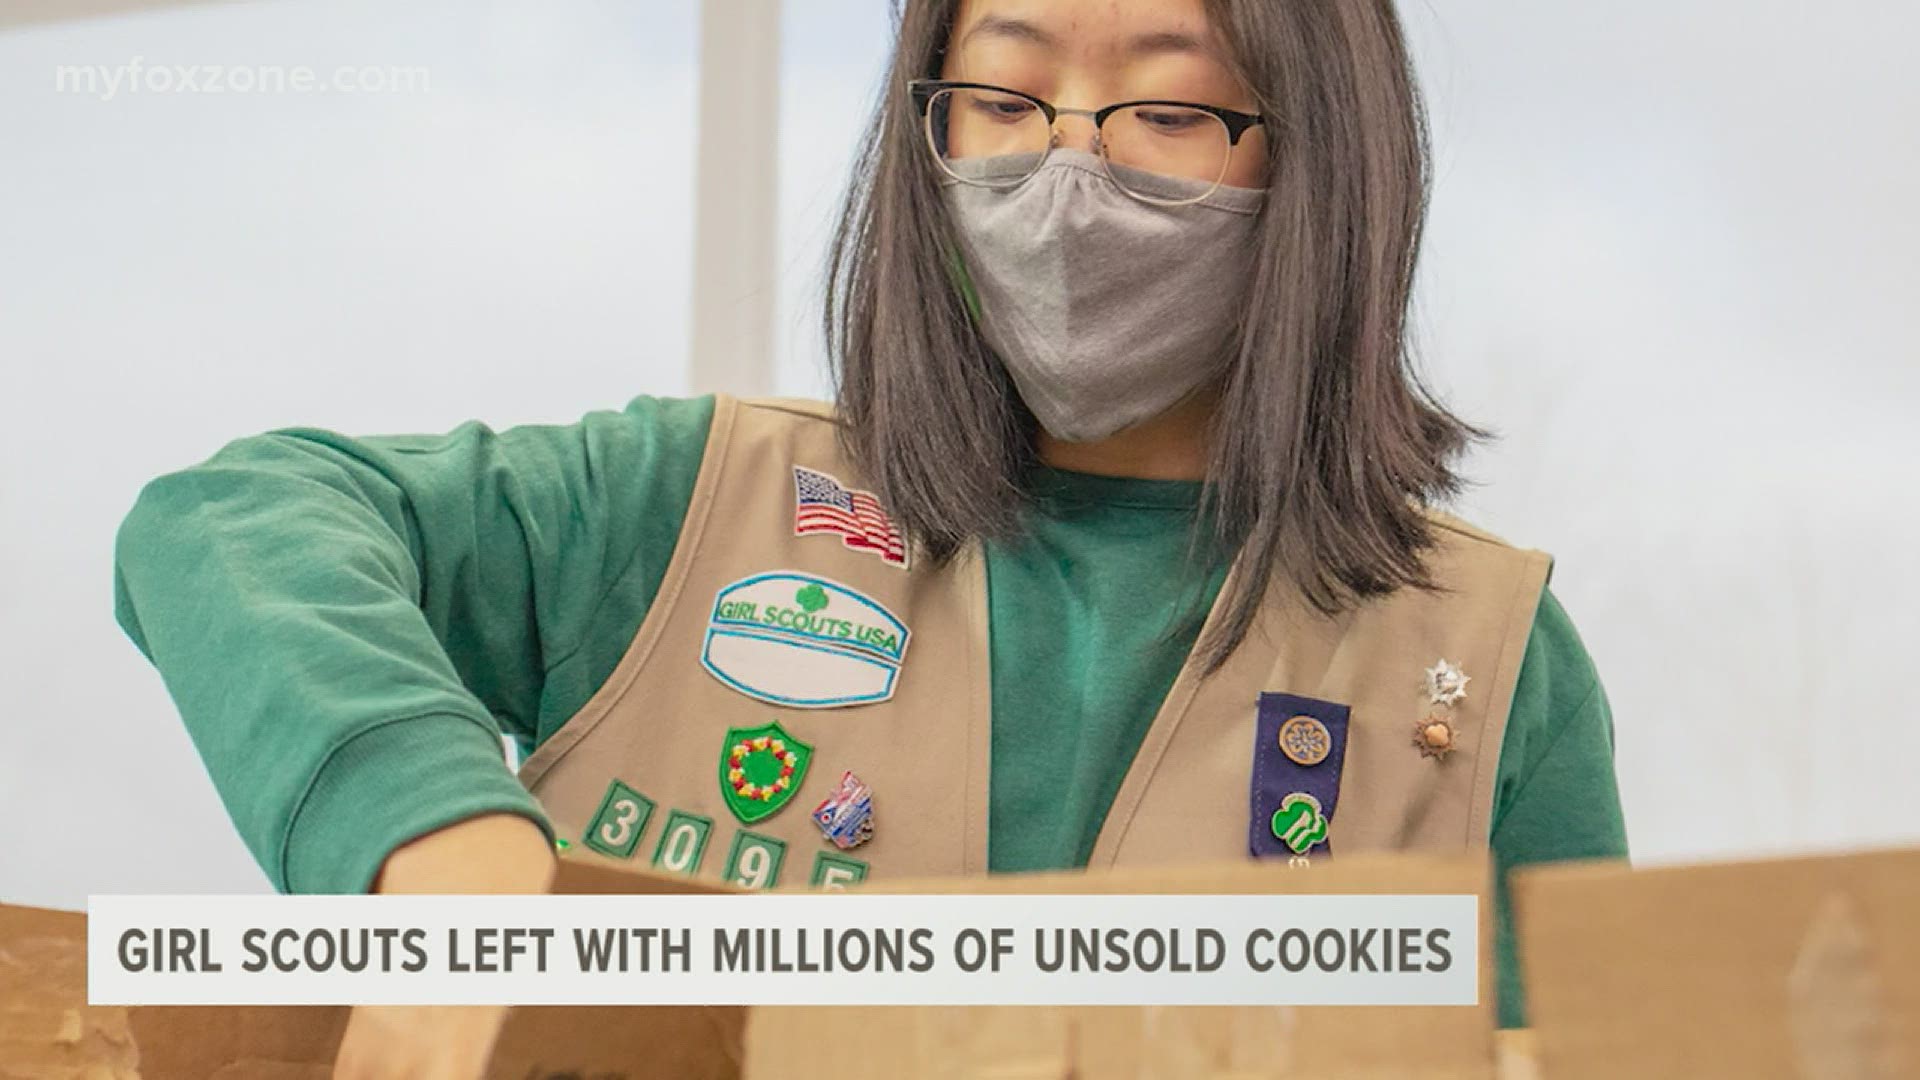 Because of the abrupt impact of the COVID-19 pandemic, Girl Scouts had to make a handful of changes to how they went about selling cookies this past year